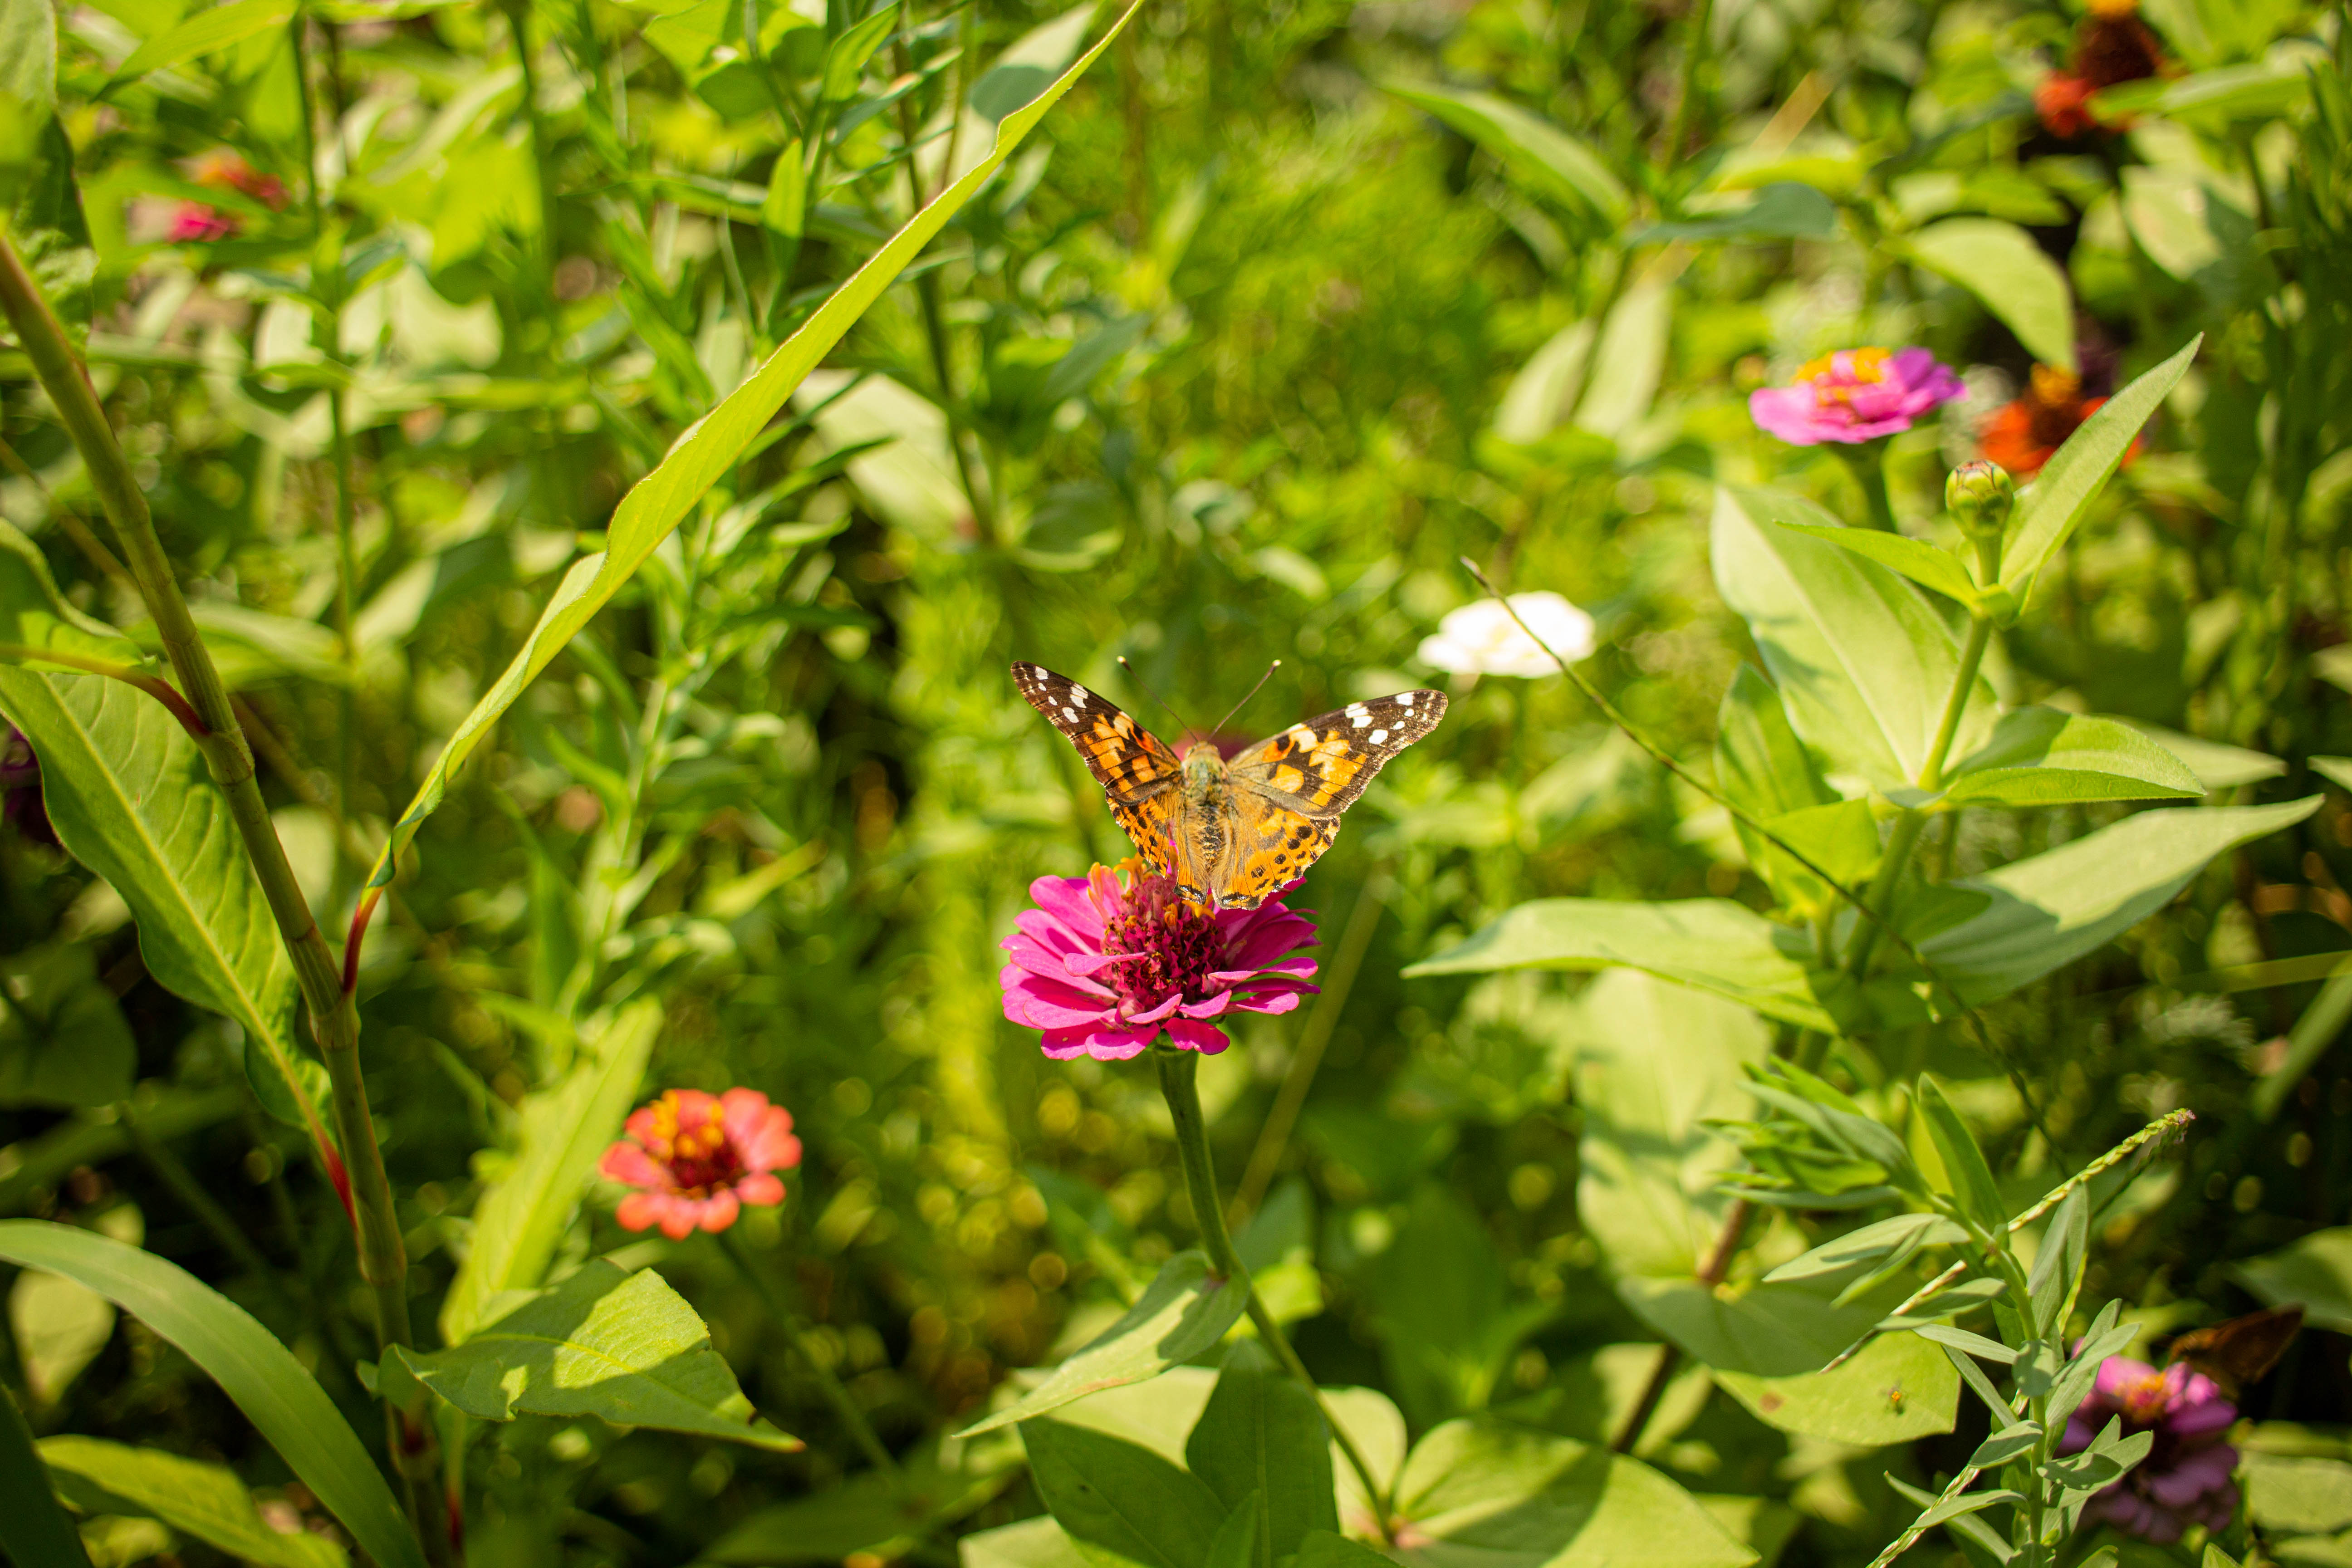 Painted lady butterfly in the pollinator garden